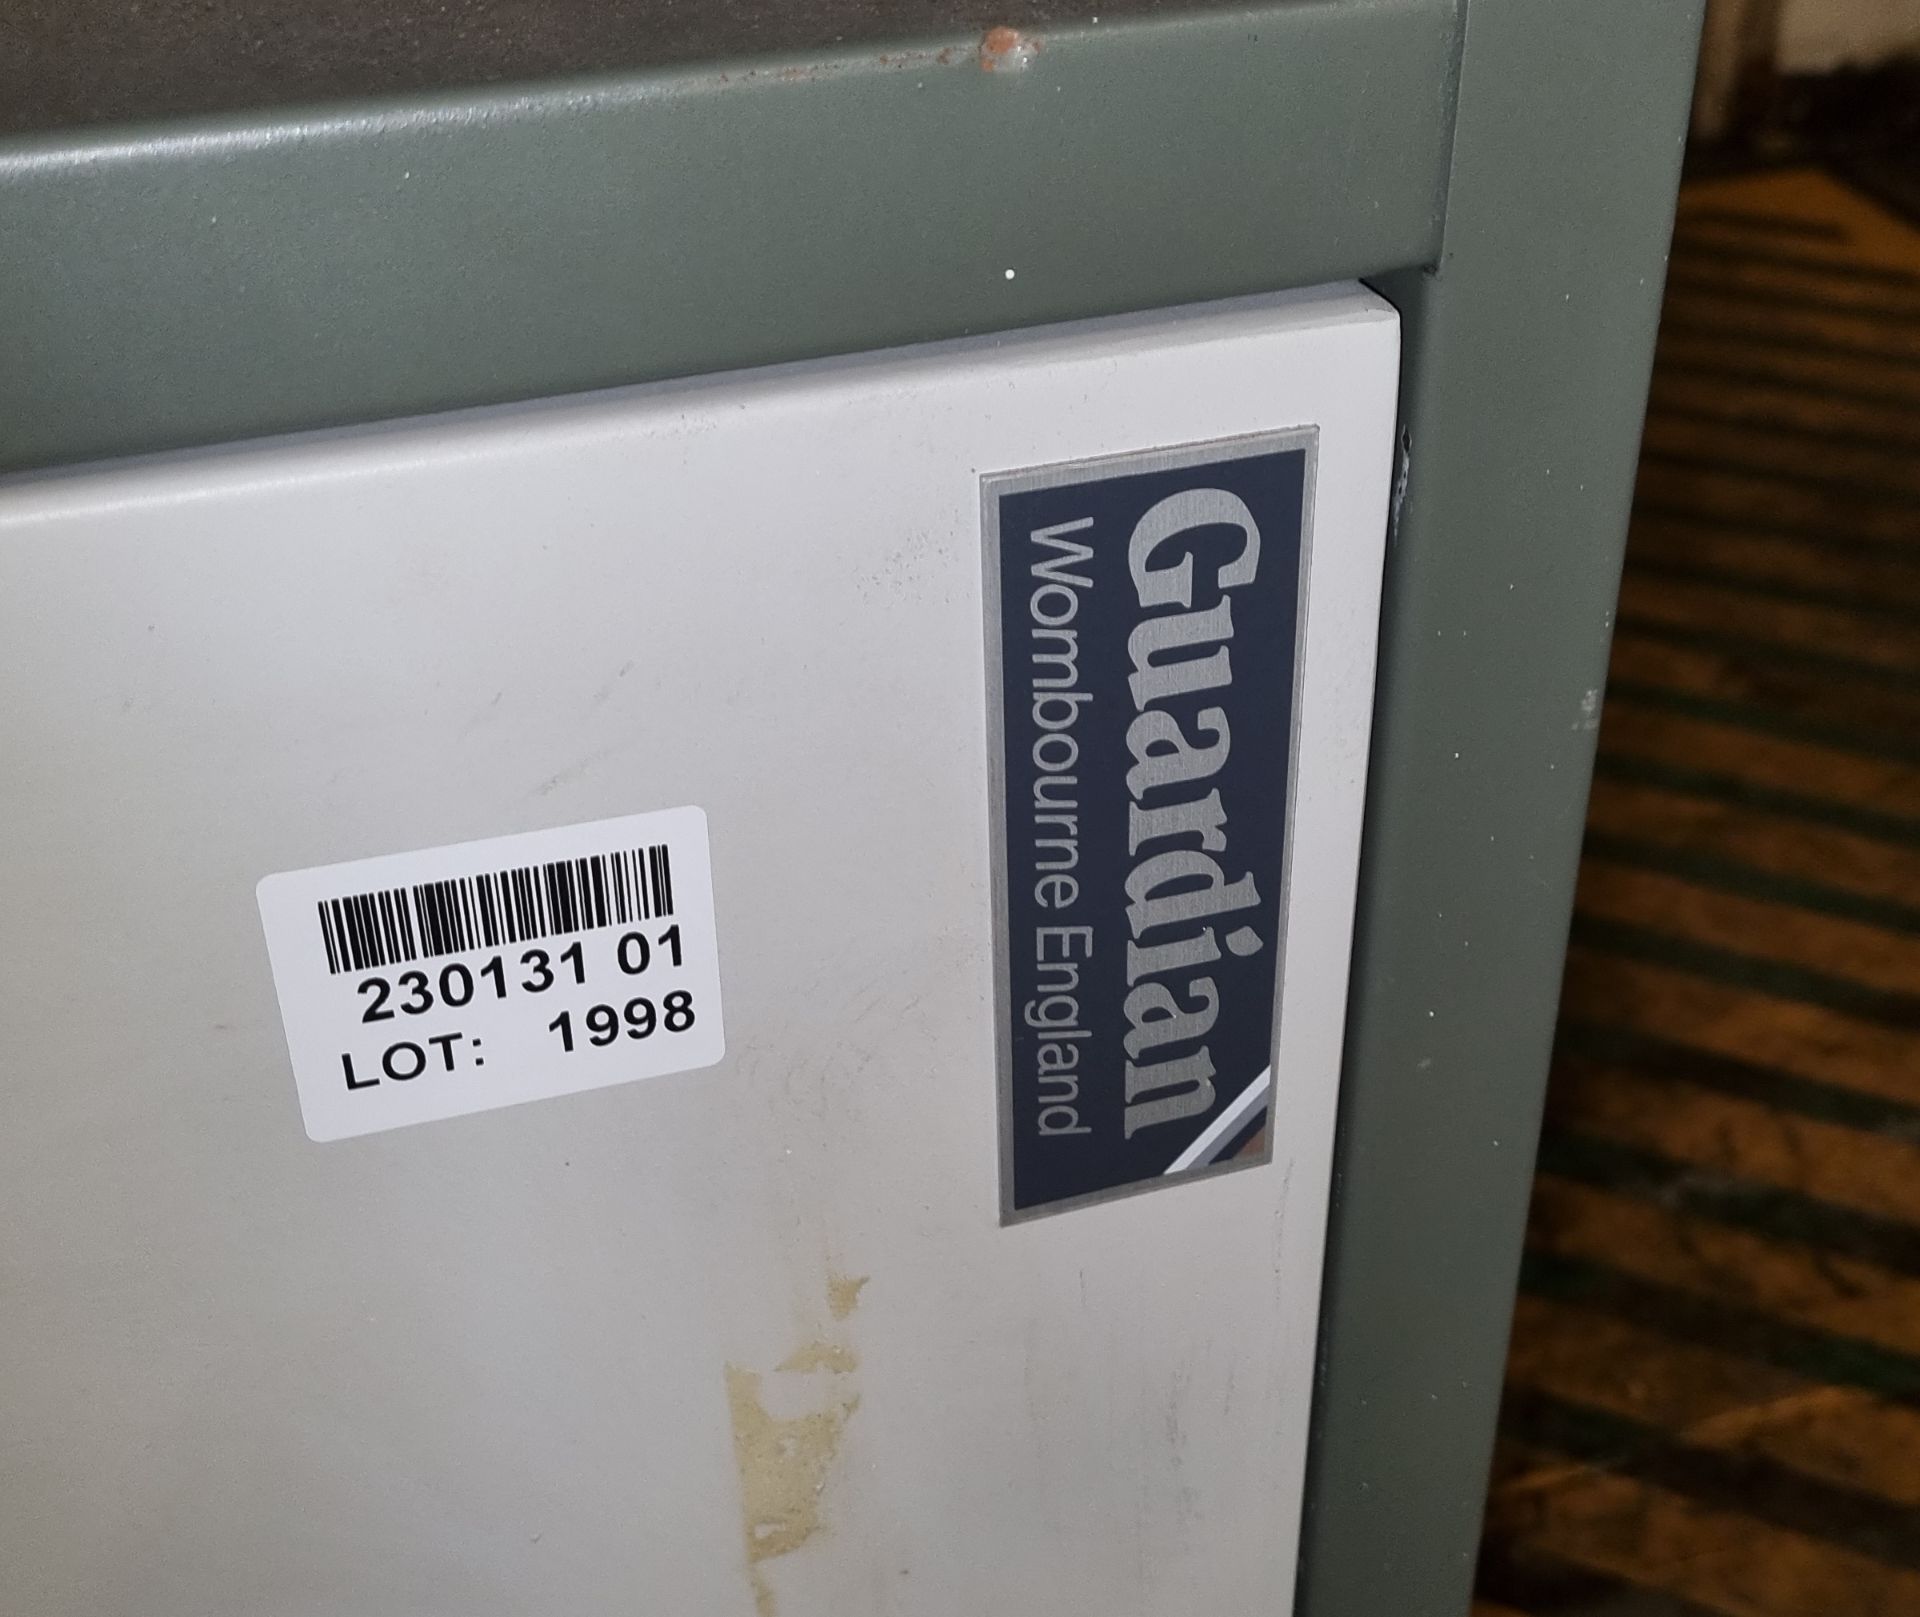 Guardian heavy duty fire security document cabinet - L93xW57xH183cm - Image 2 of 2